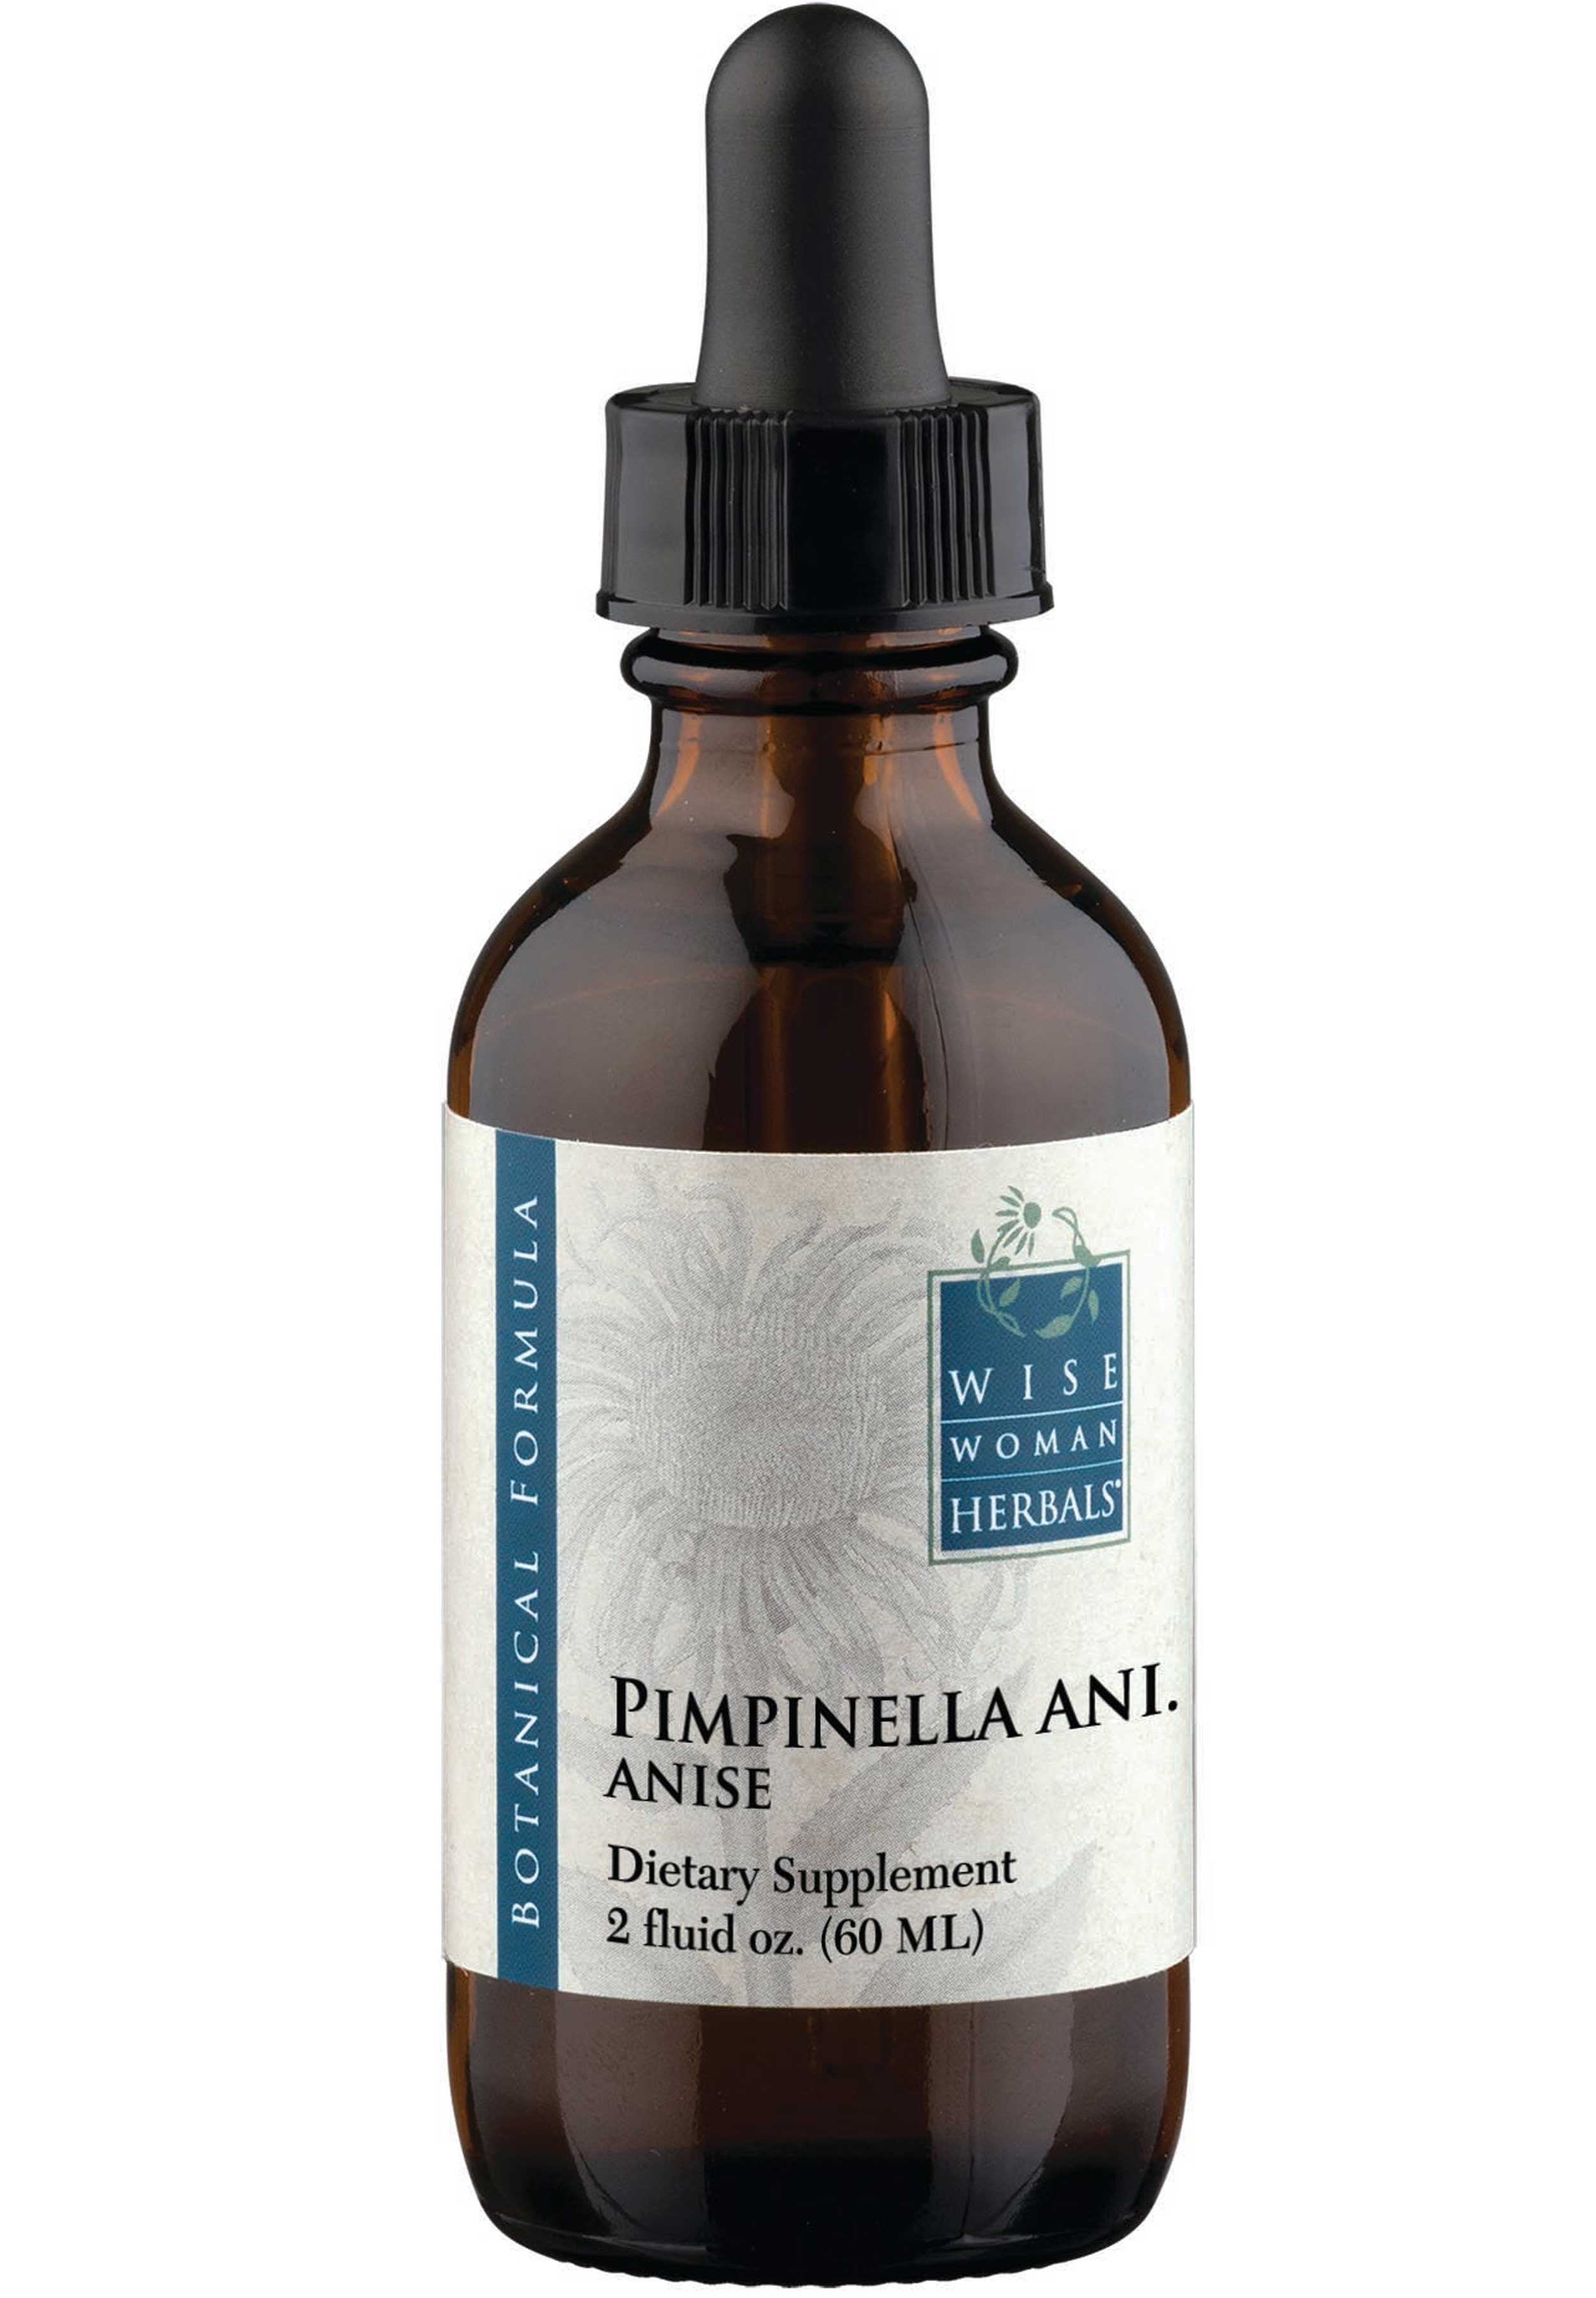 Wise Woman Herbals Pimpinella Anisum Anise